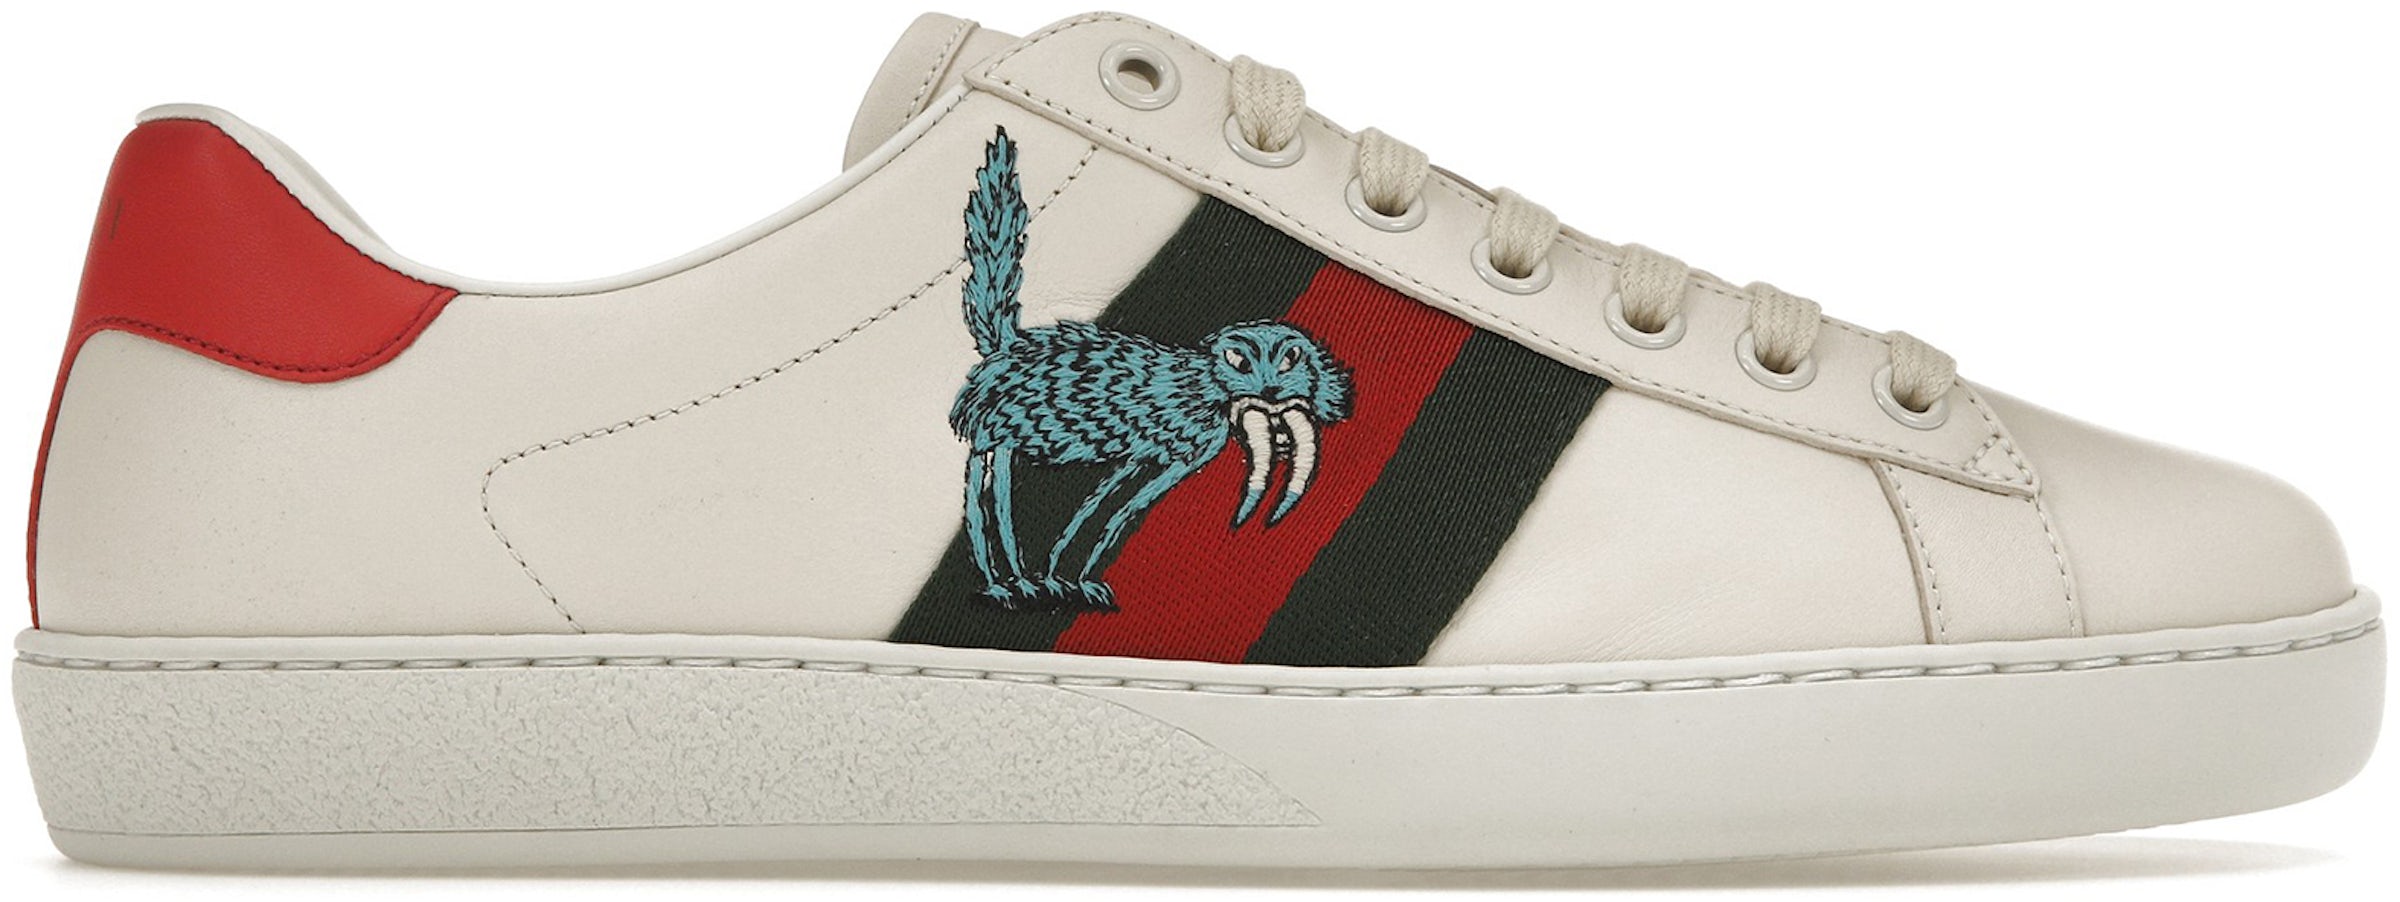 19 Best Gucci sneakers outfit ideas  gucci sneakers outfit, sneakers  outfit, gucci sneakers